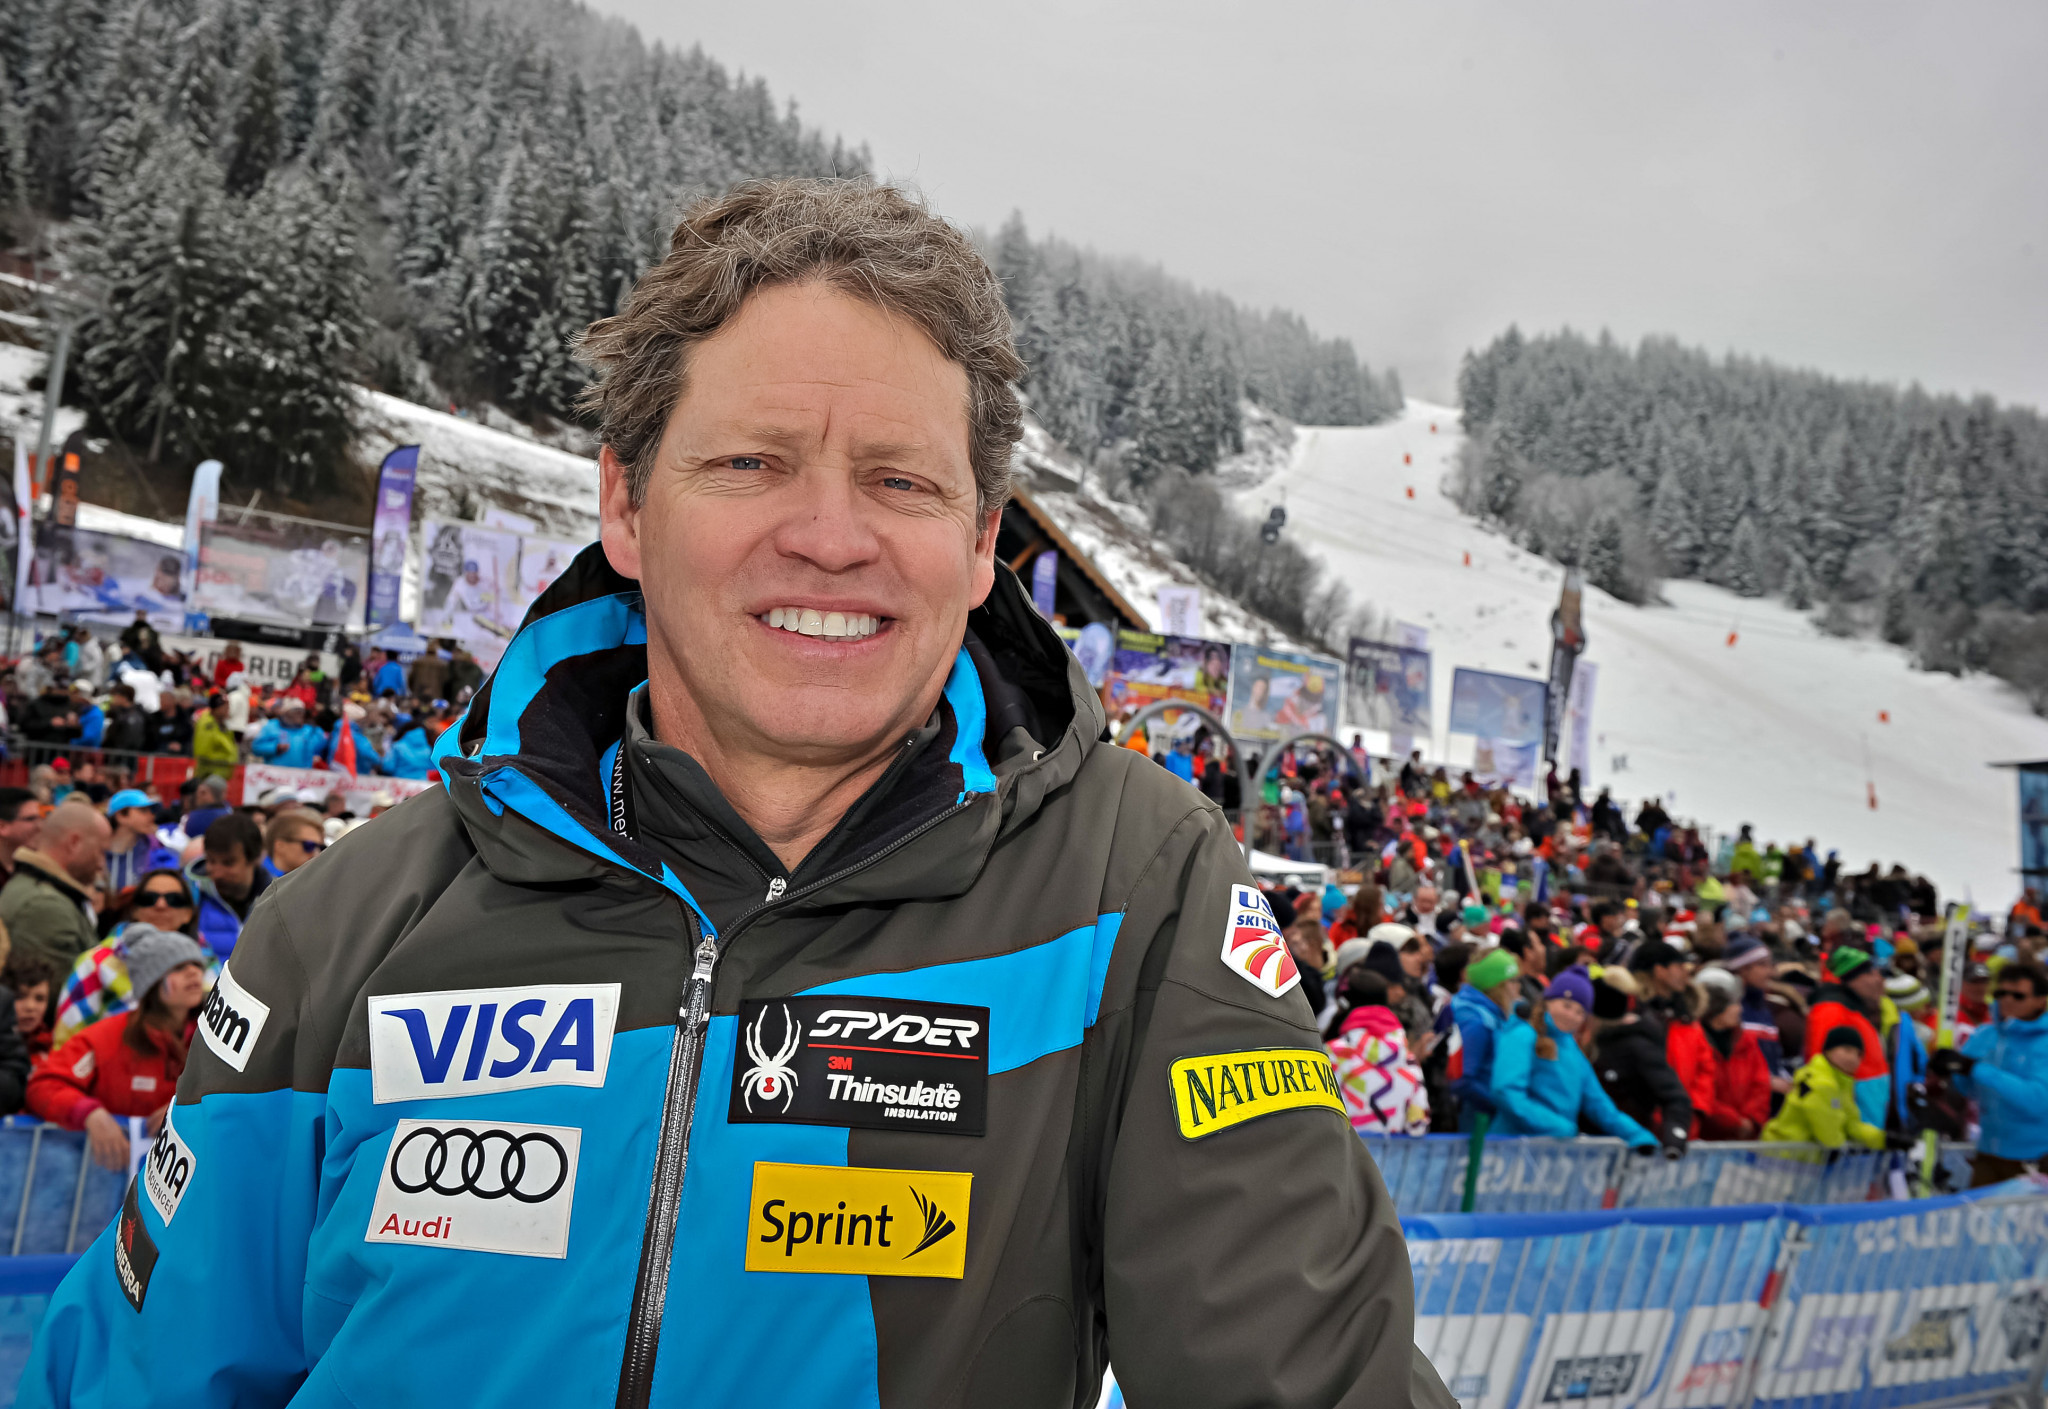 Tiger Shaw is stepping down after eight years as President of U.S. Ski & Snowboard ©Getty Images